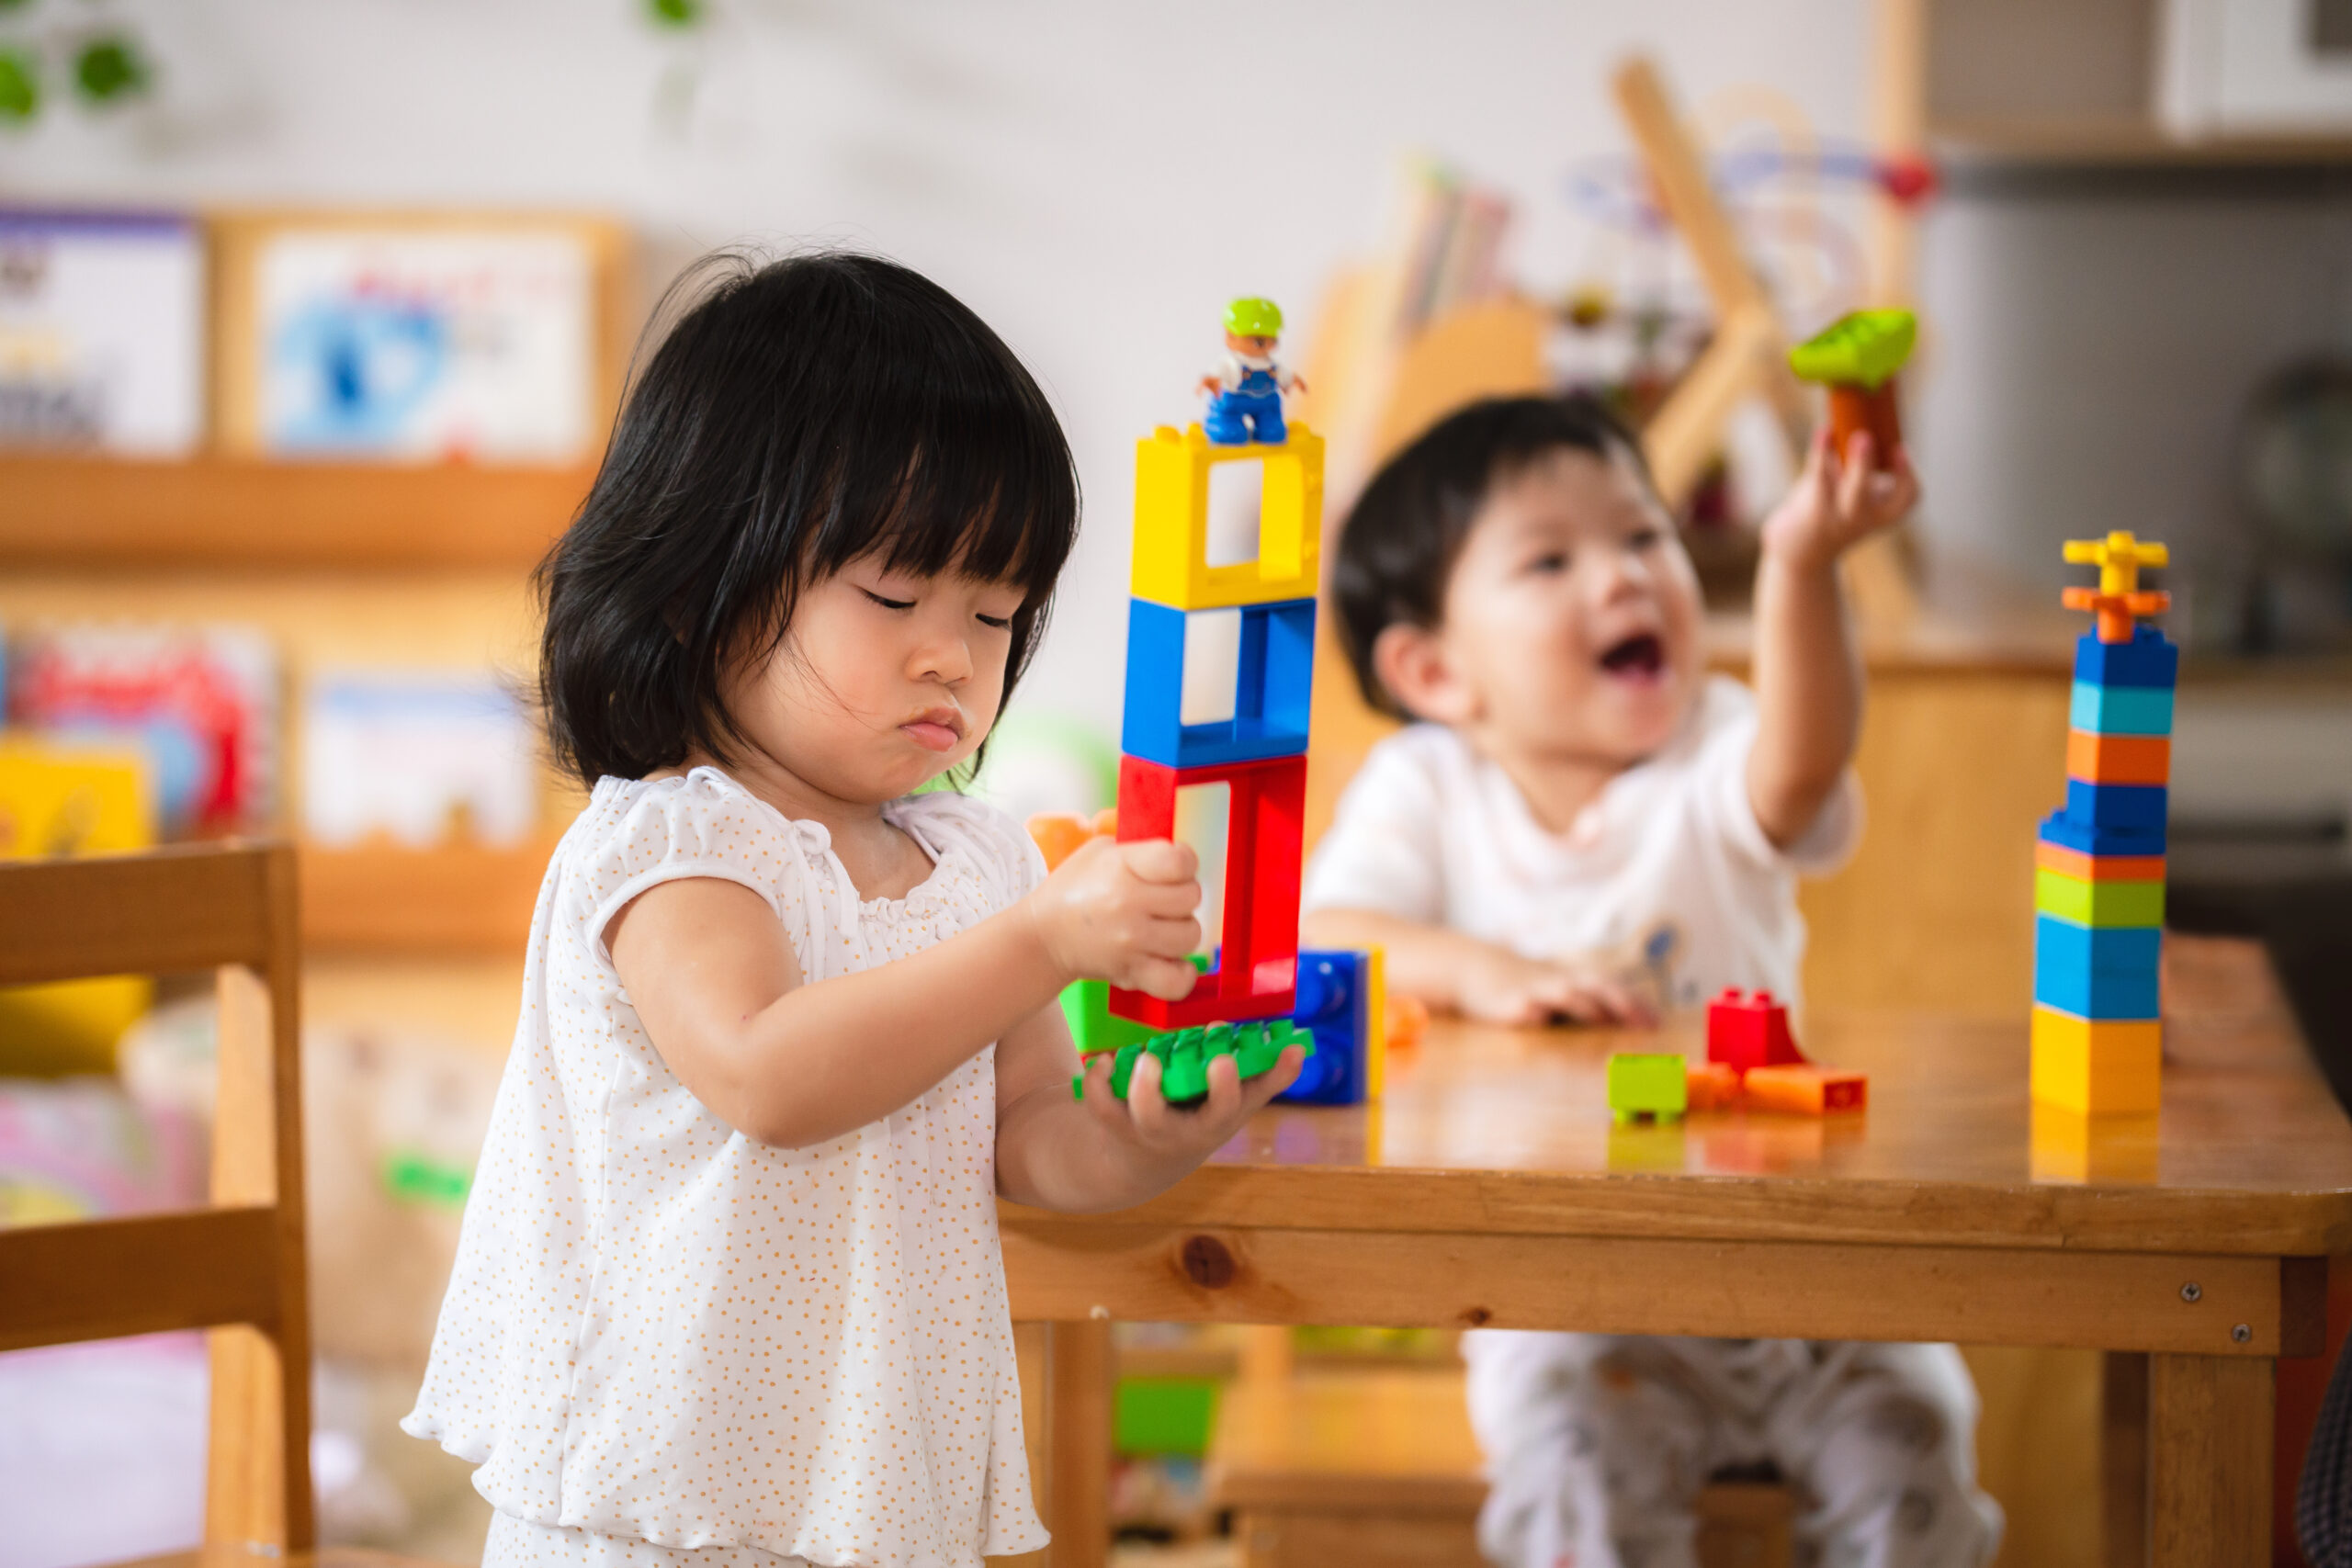 Two children playing with blocks.